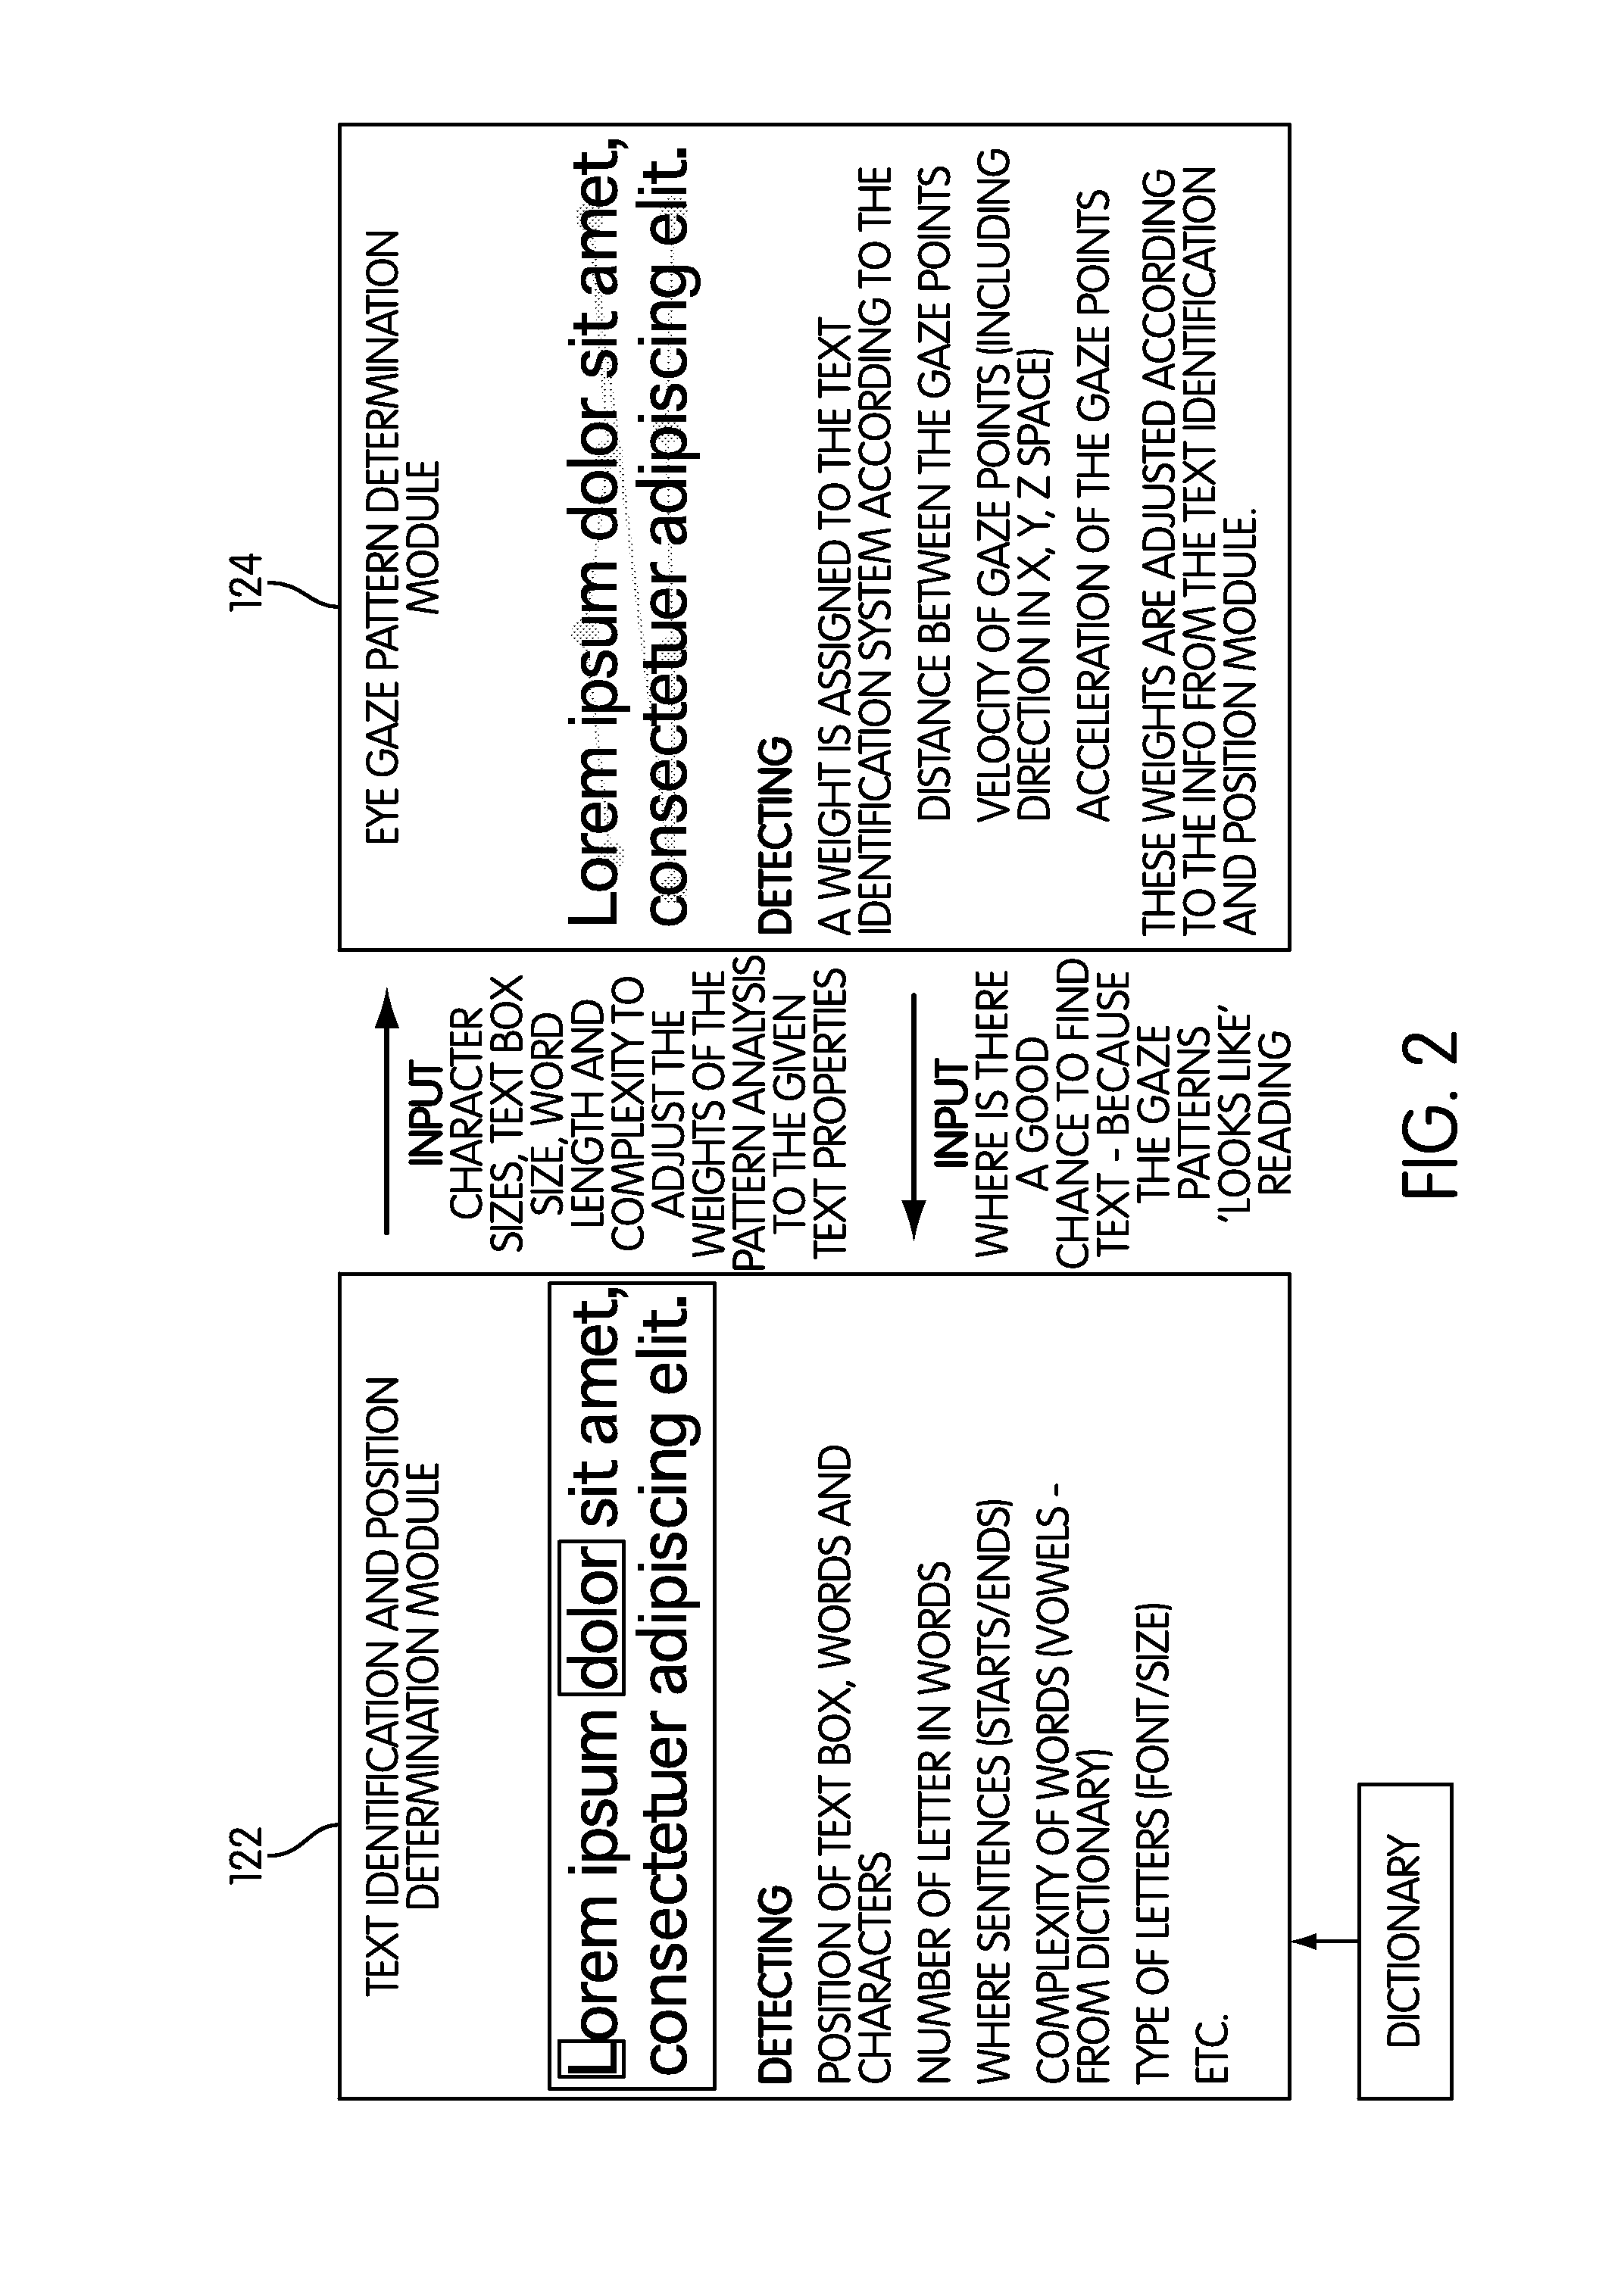 System and method for identifying the existence and position of text in visual media content and for determining a subject's interactions with the text